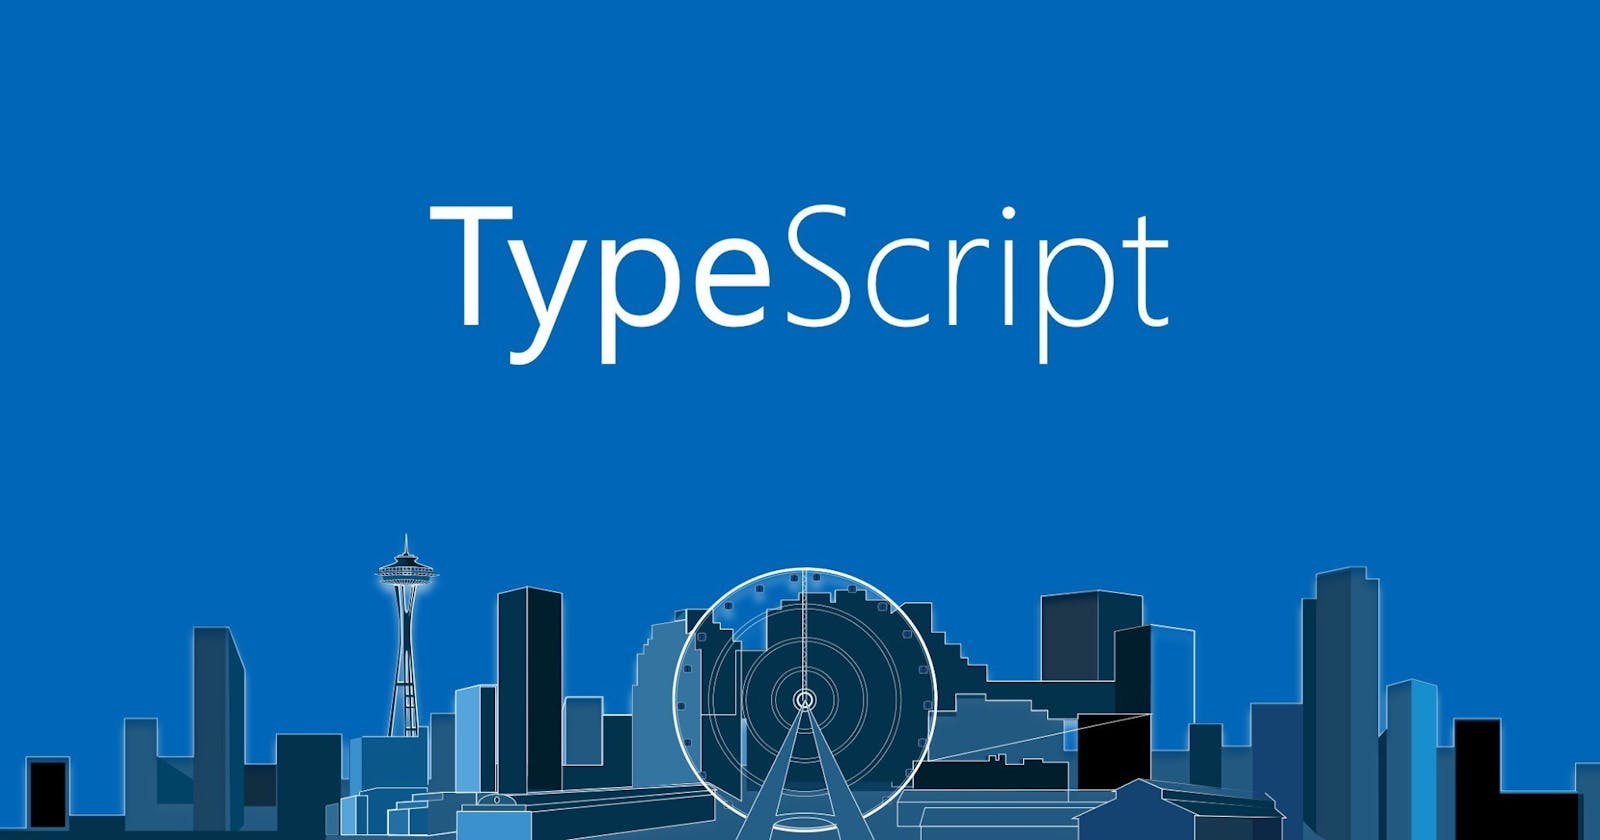 Things That Make TypeScript Great